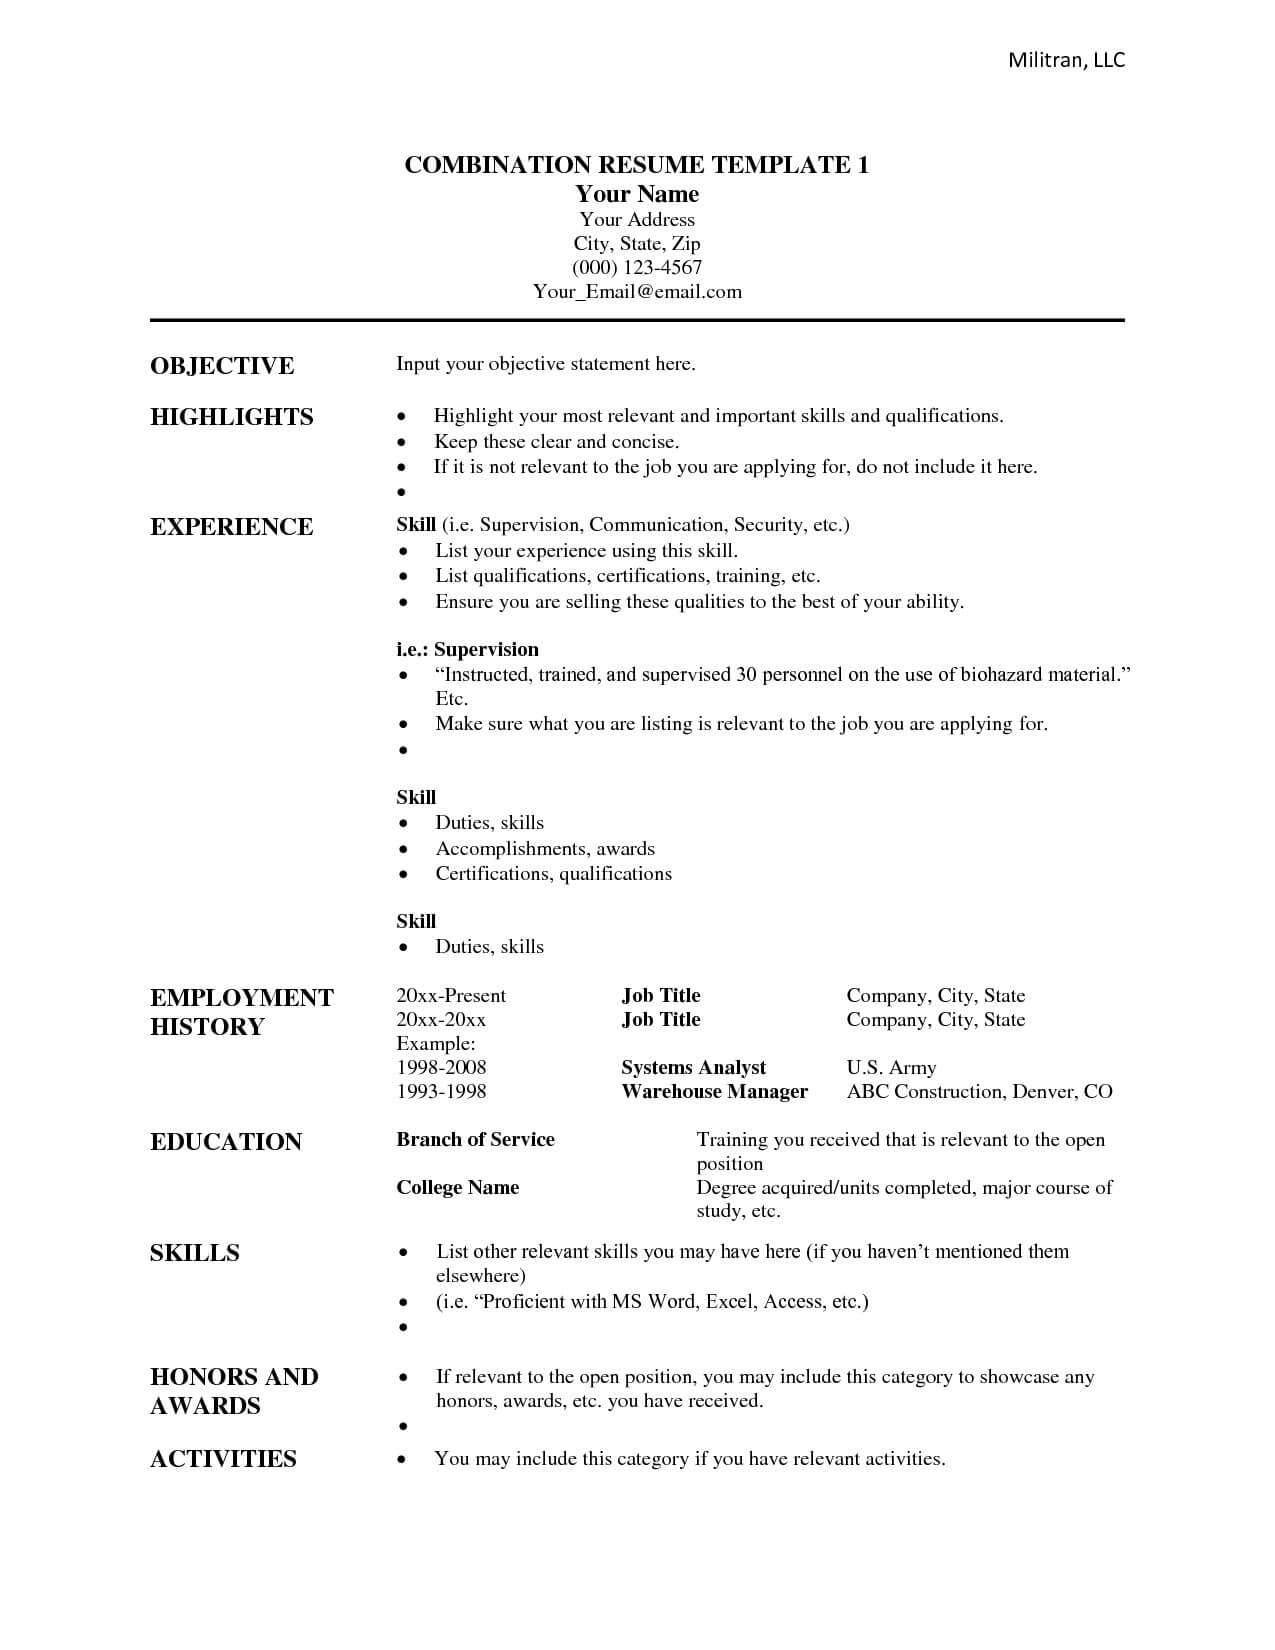 30 Combination Resume Template Free | Andaluzseattle For Combination Resume Template Word